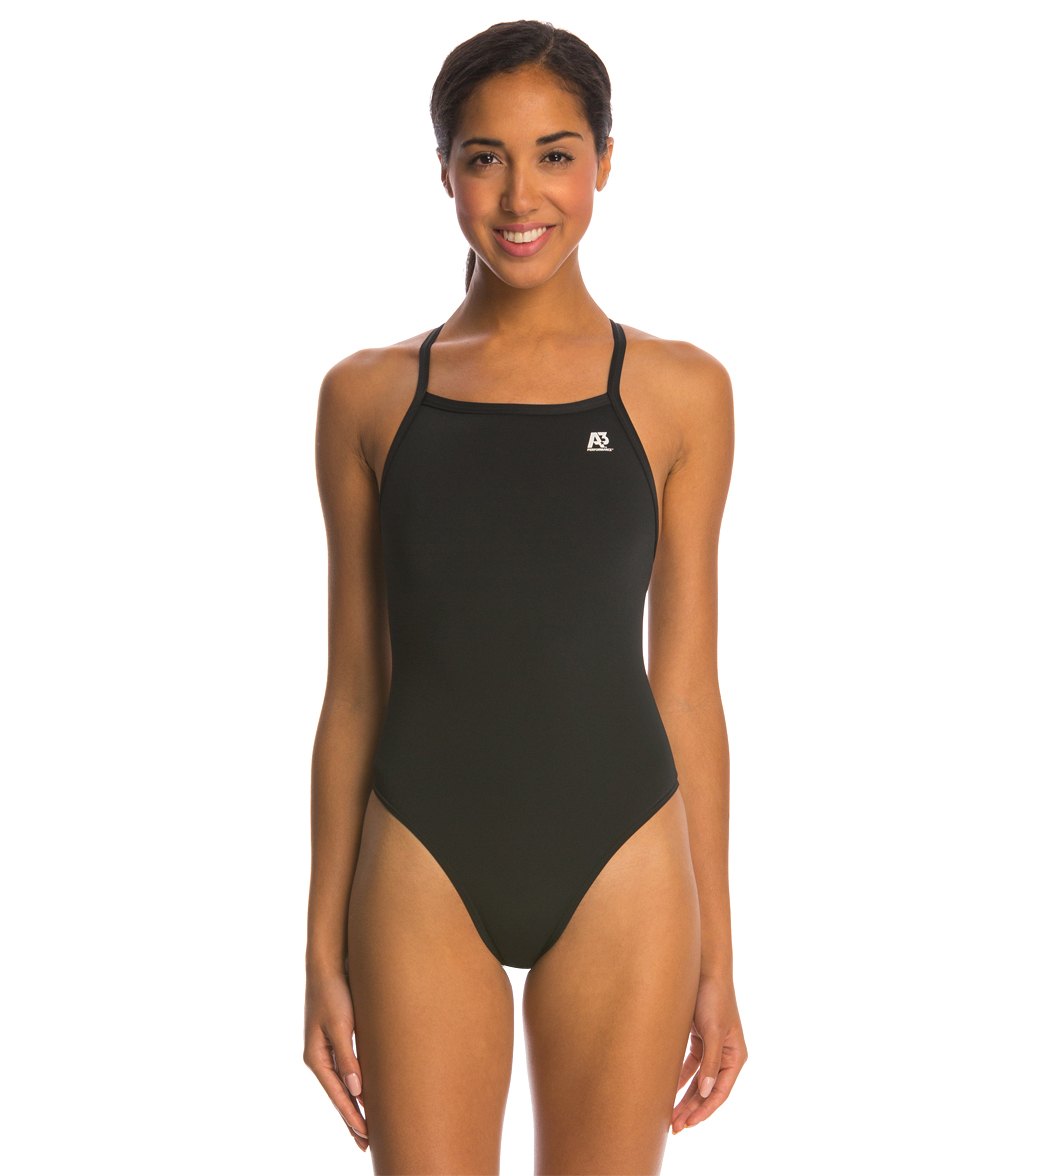 A3 Performance Female X-Back Solid Poly One Piece Swimsuit - Black 26 Polyester/Pbt - Swimoutlet.com